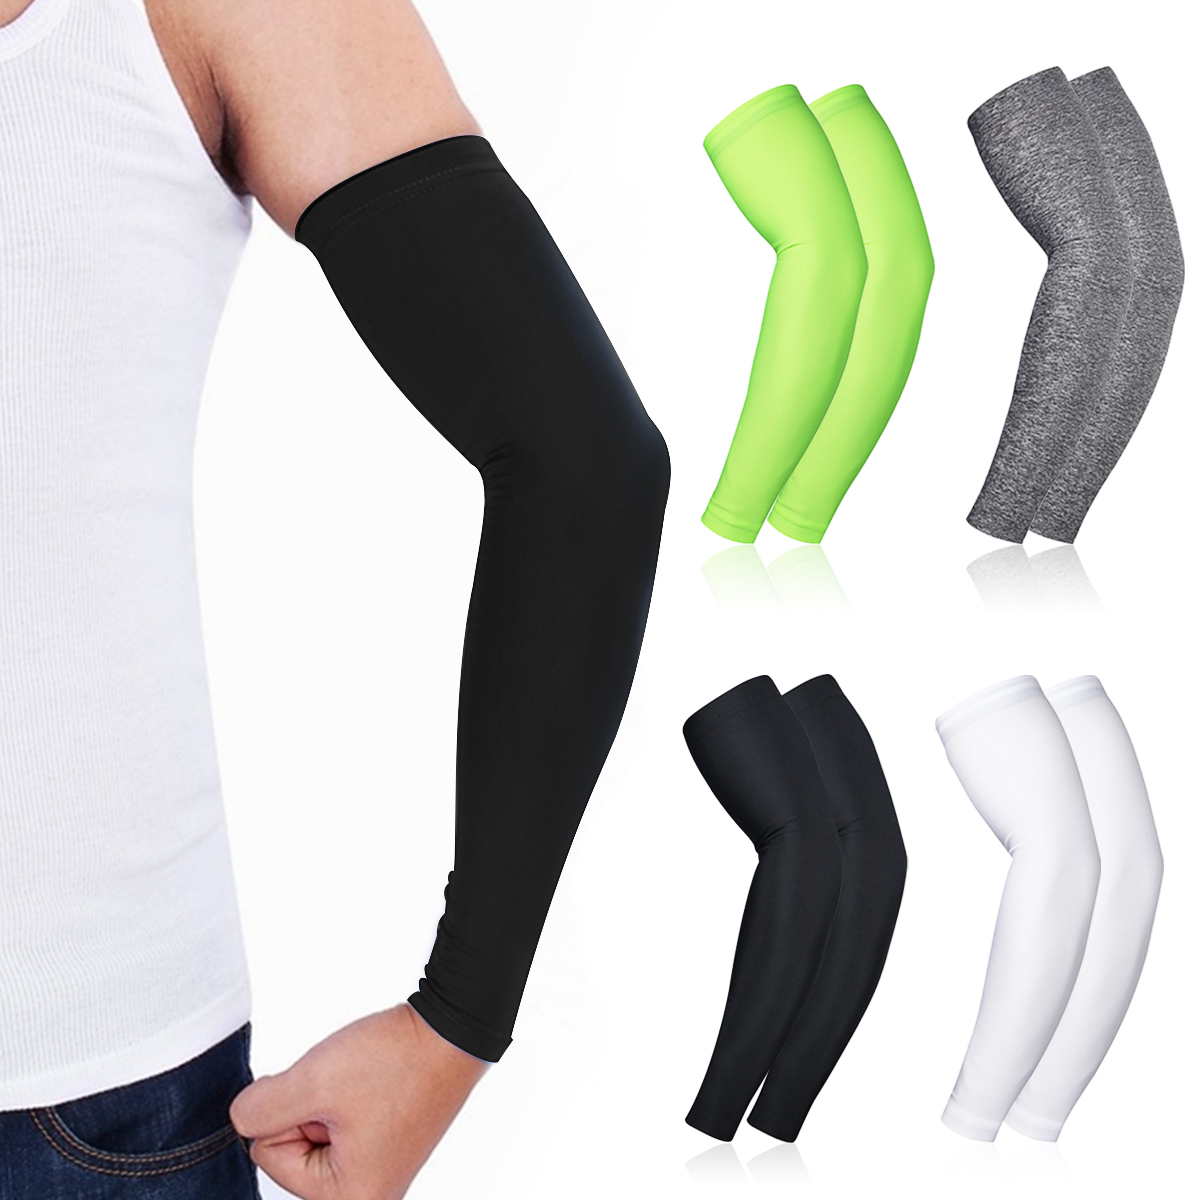 1-Pair-Outdoor-Sport-Running-UV-Sun-Protection-Leg-Cover-Basketball-Arm-Sleeves-Cycling-Bicycle-Arm--1529168-11